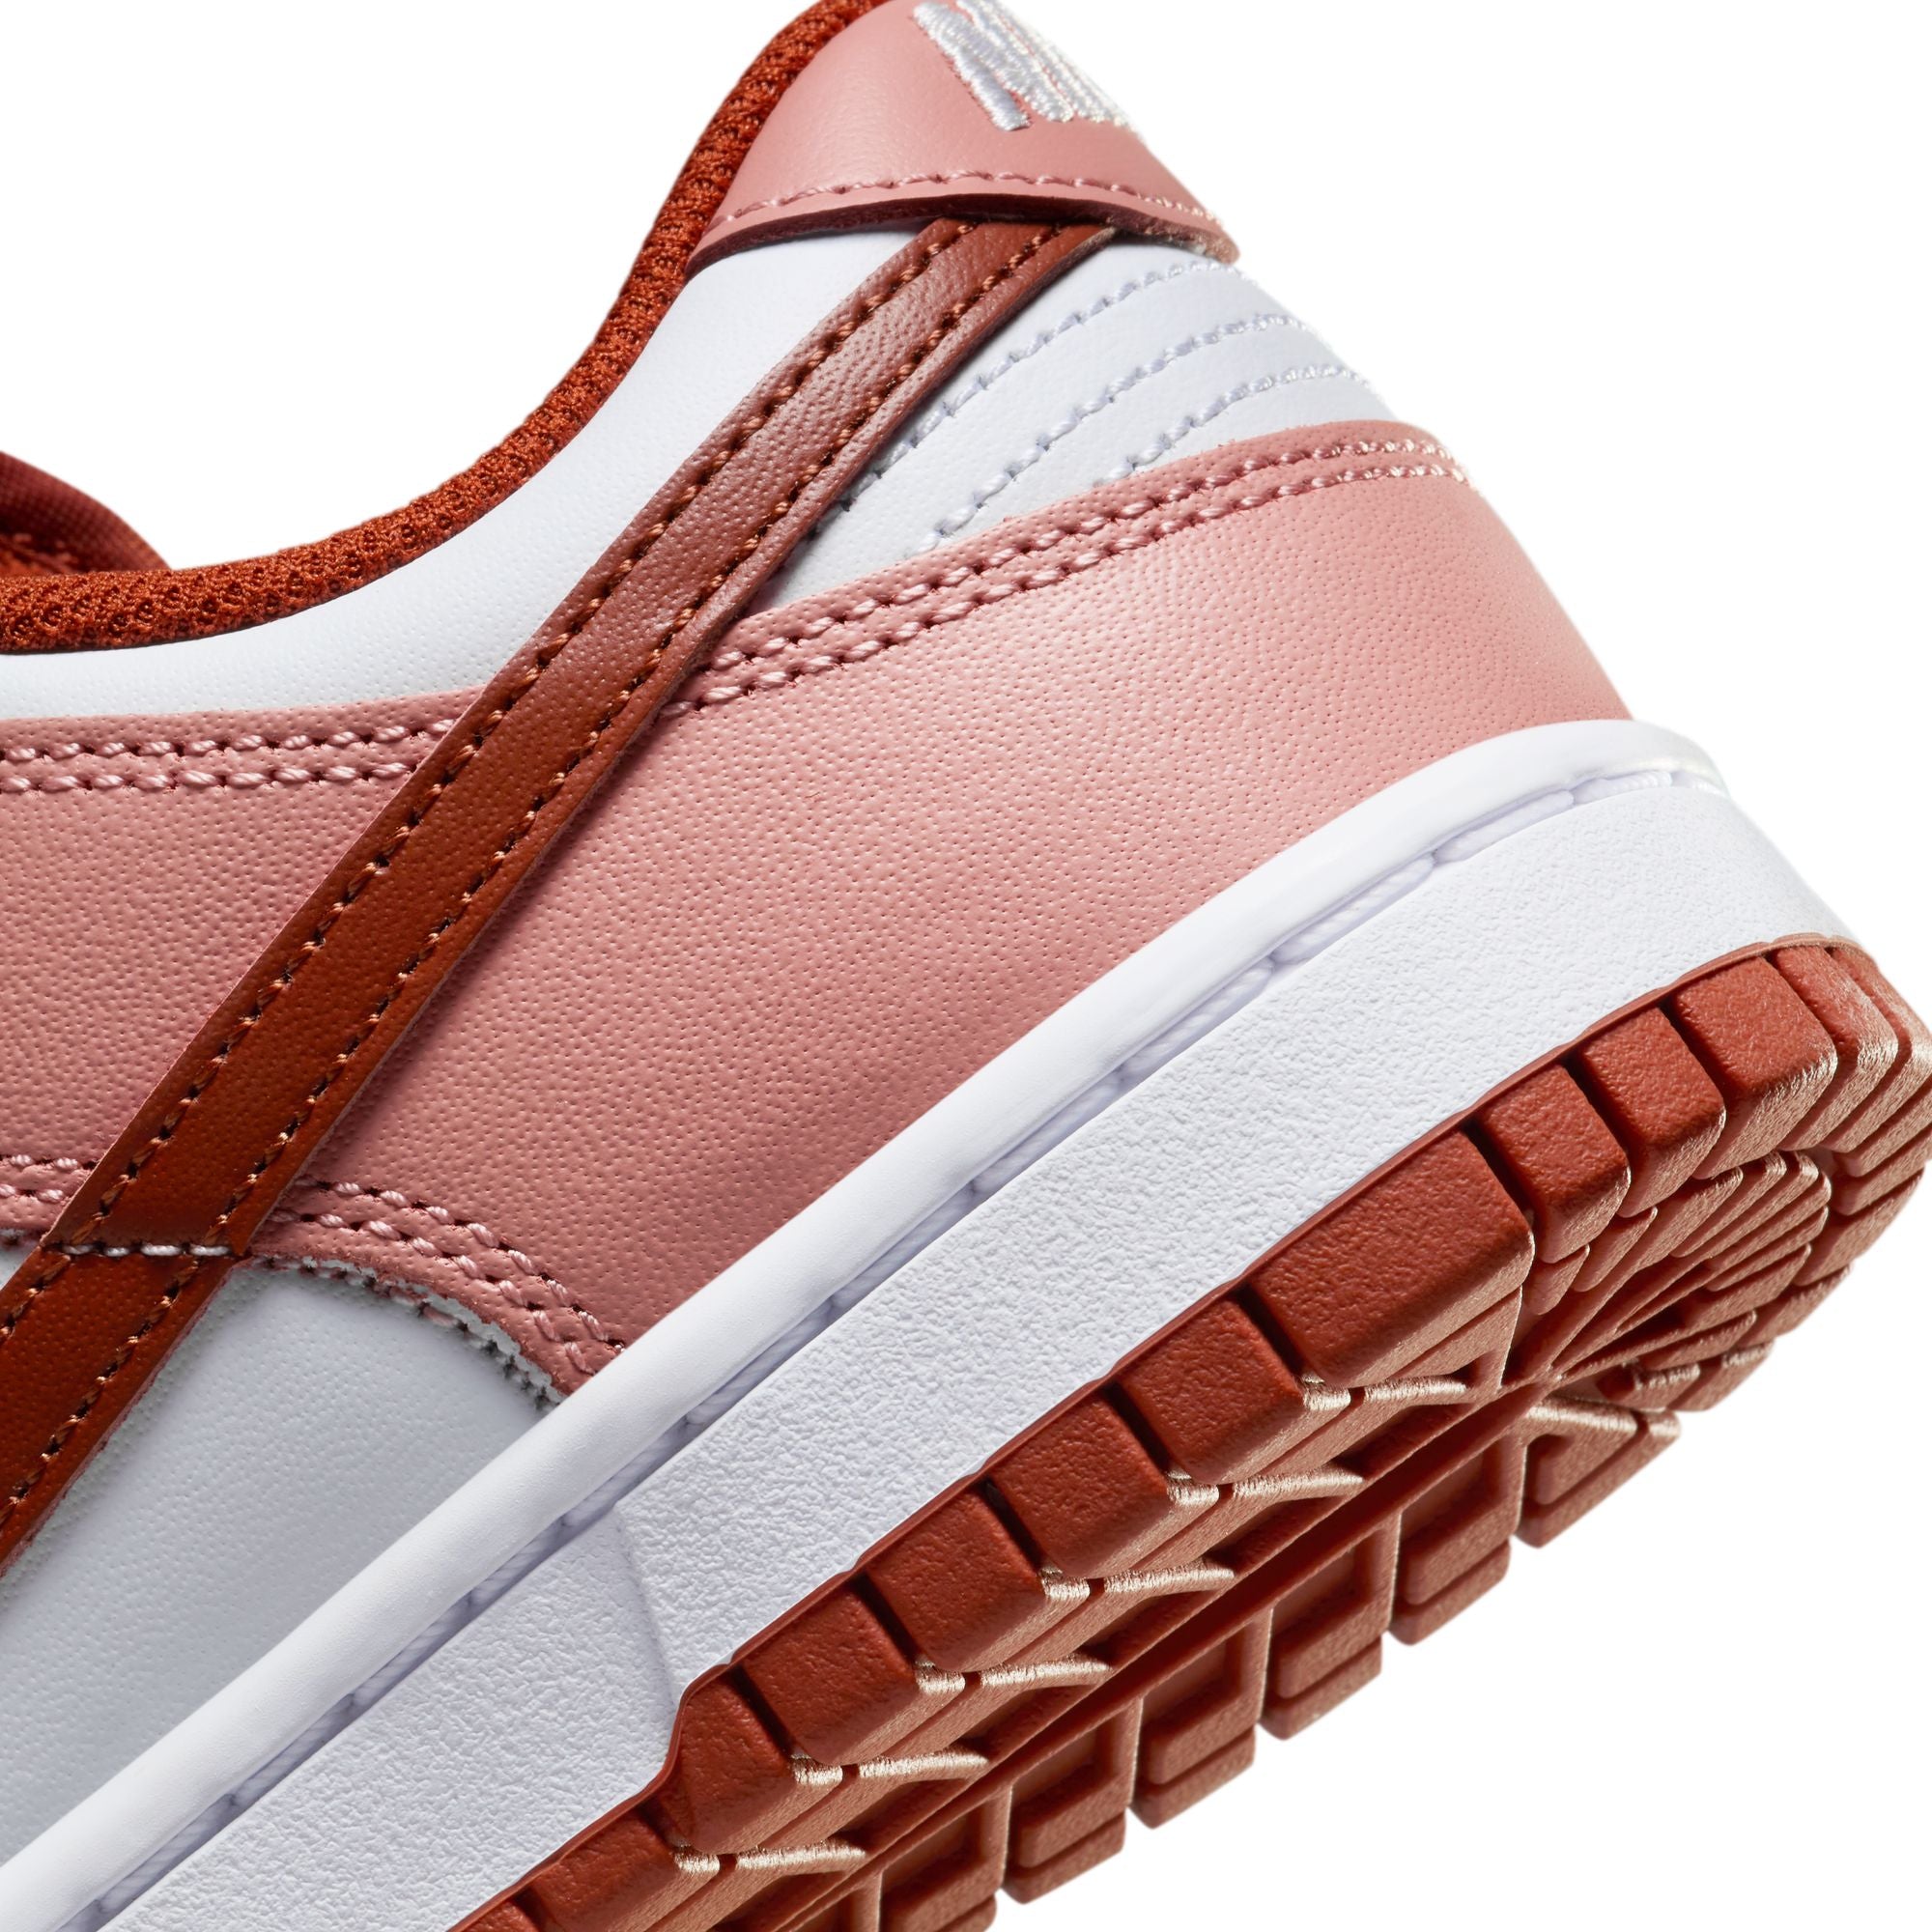 Womens Nike Dunk Low 'Red Stardust'